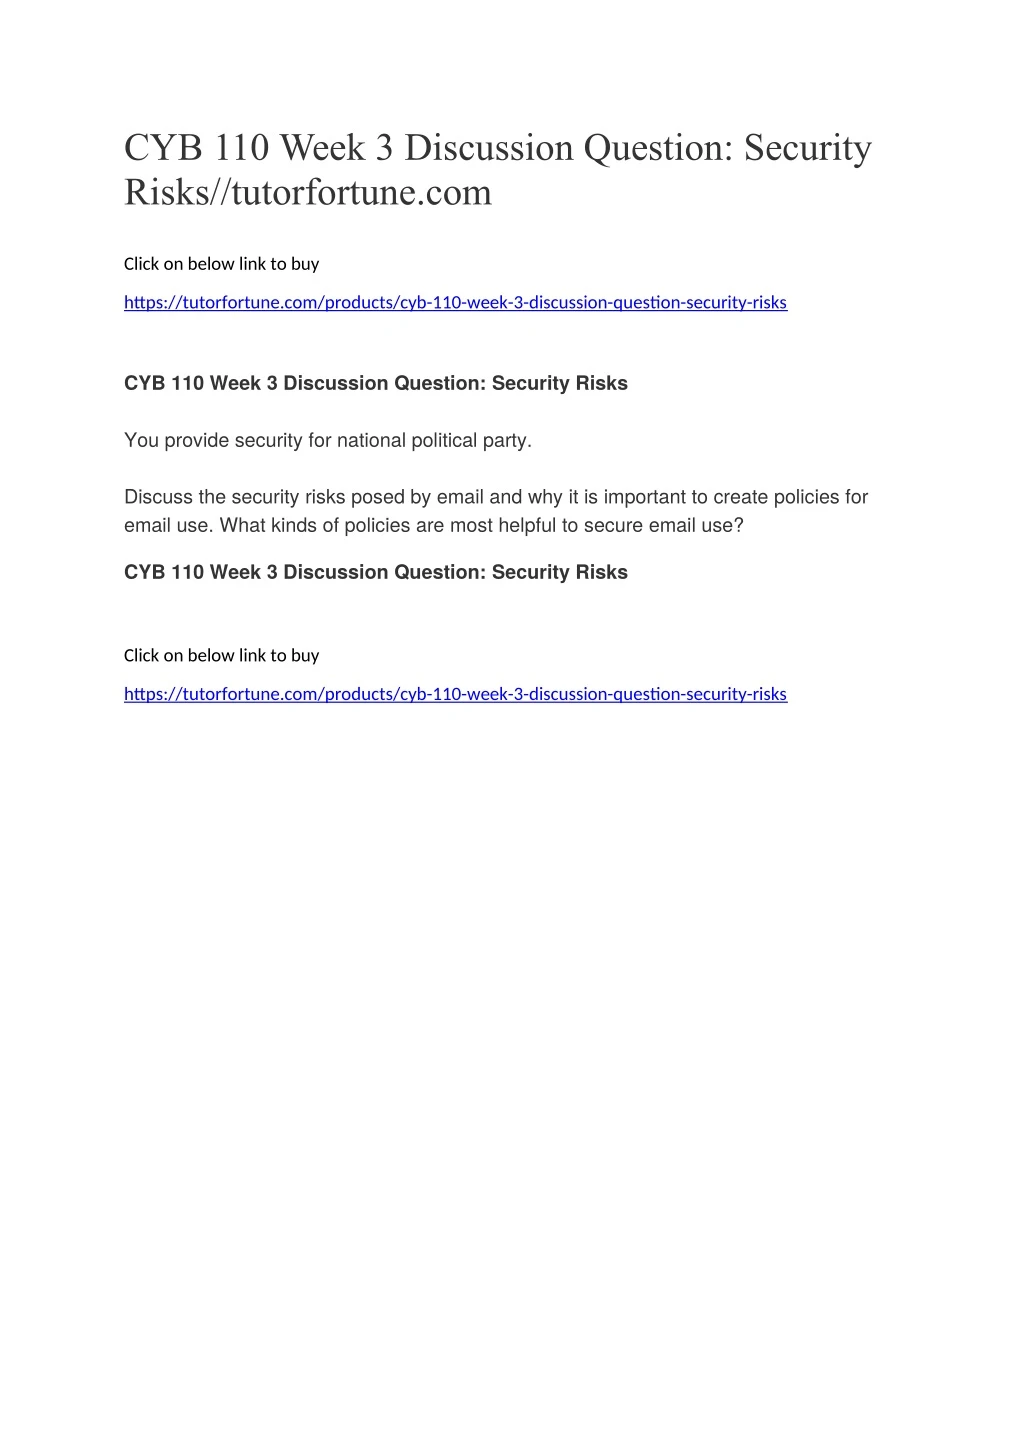 cyb 110 week 3 discussion question security risks